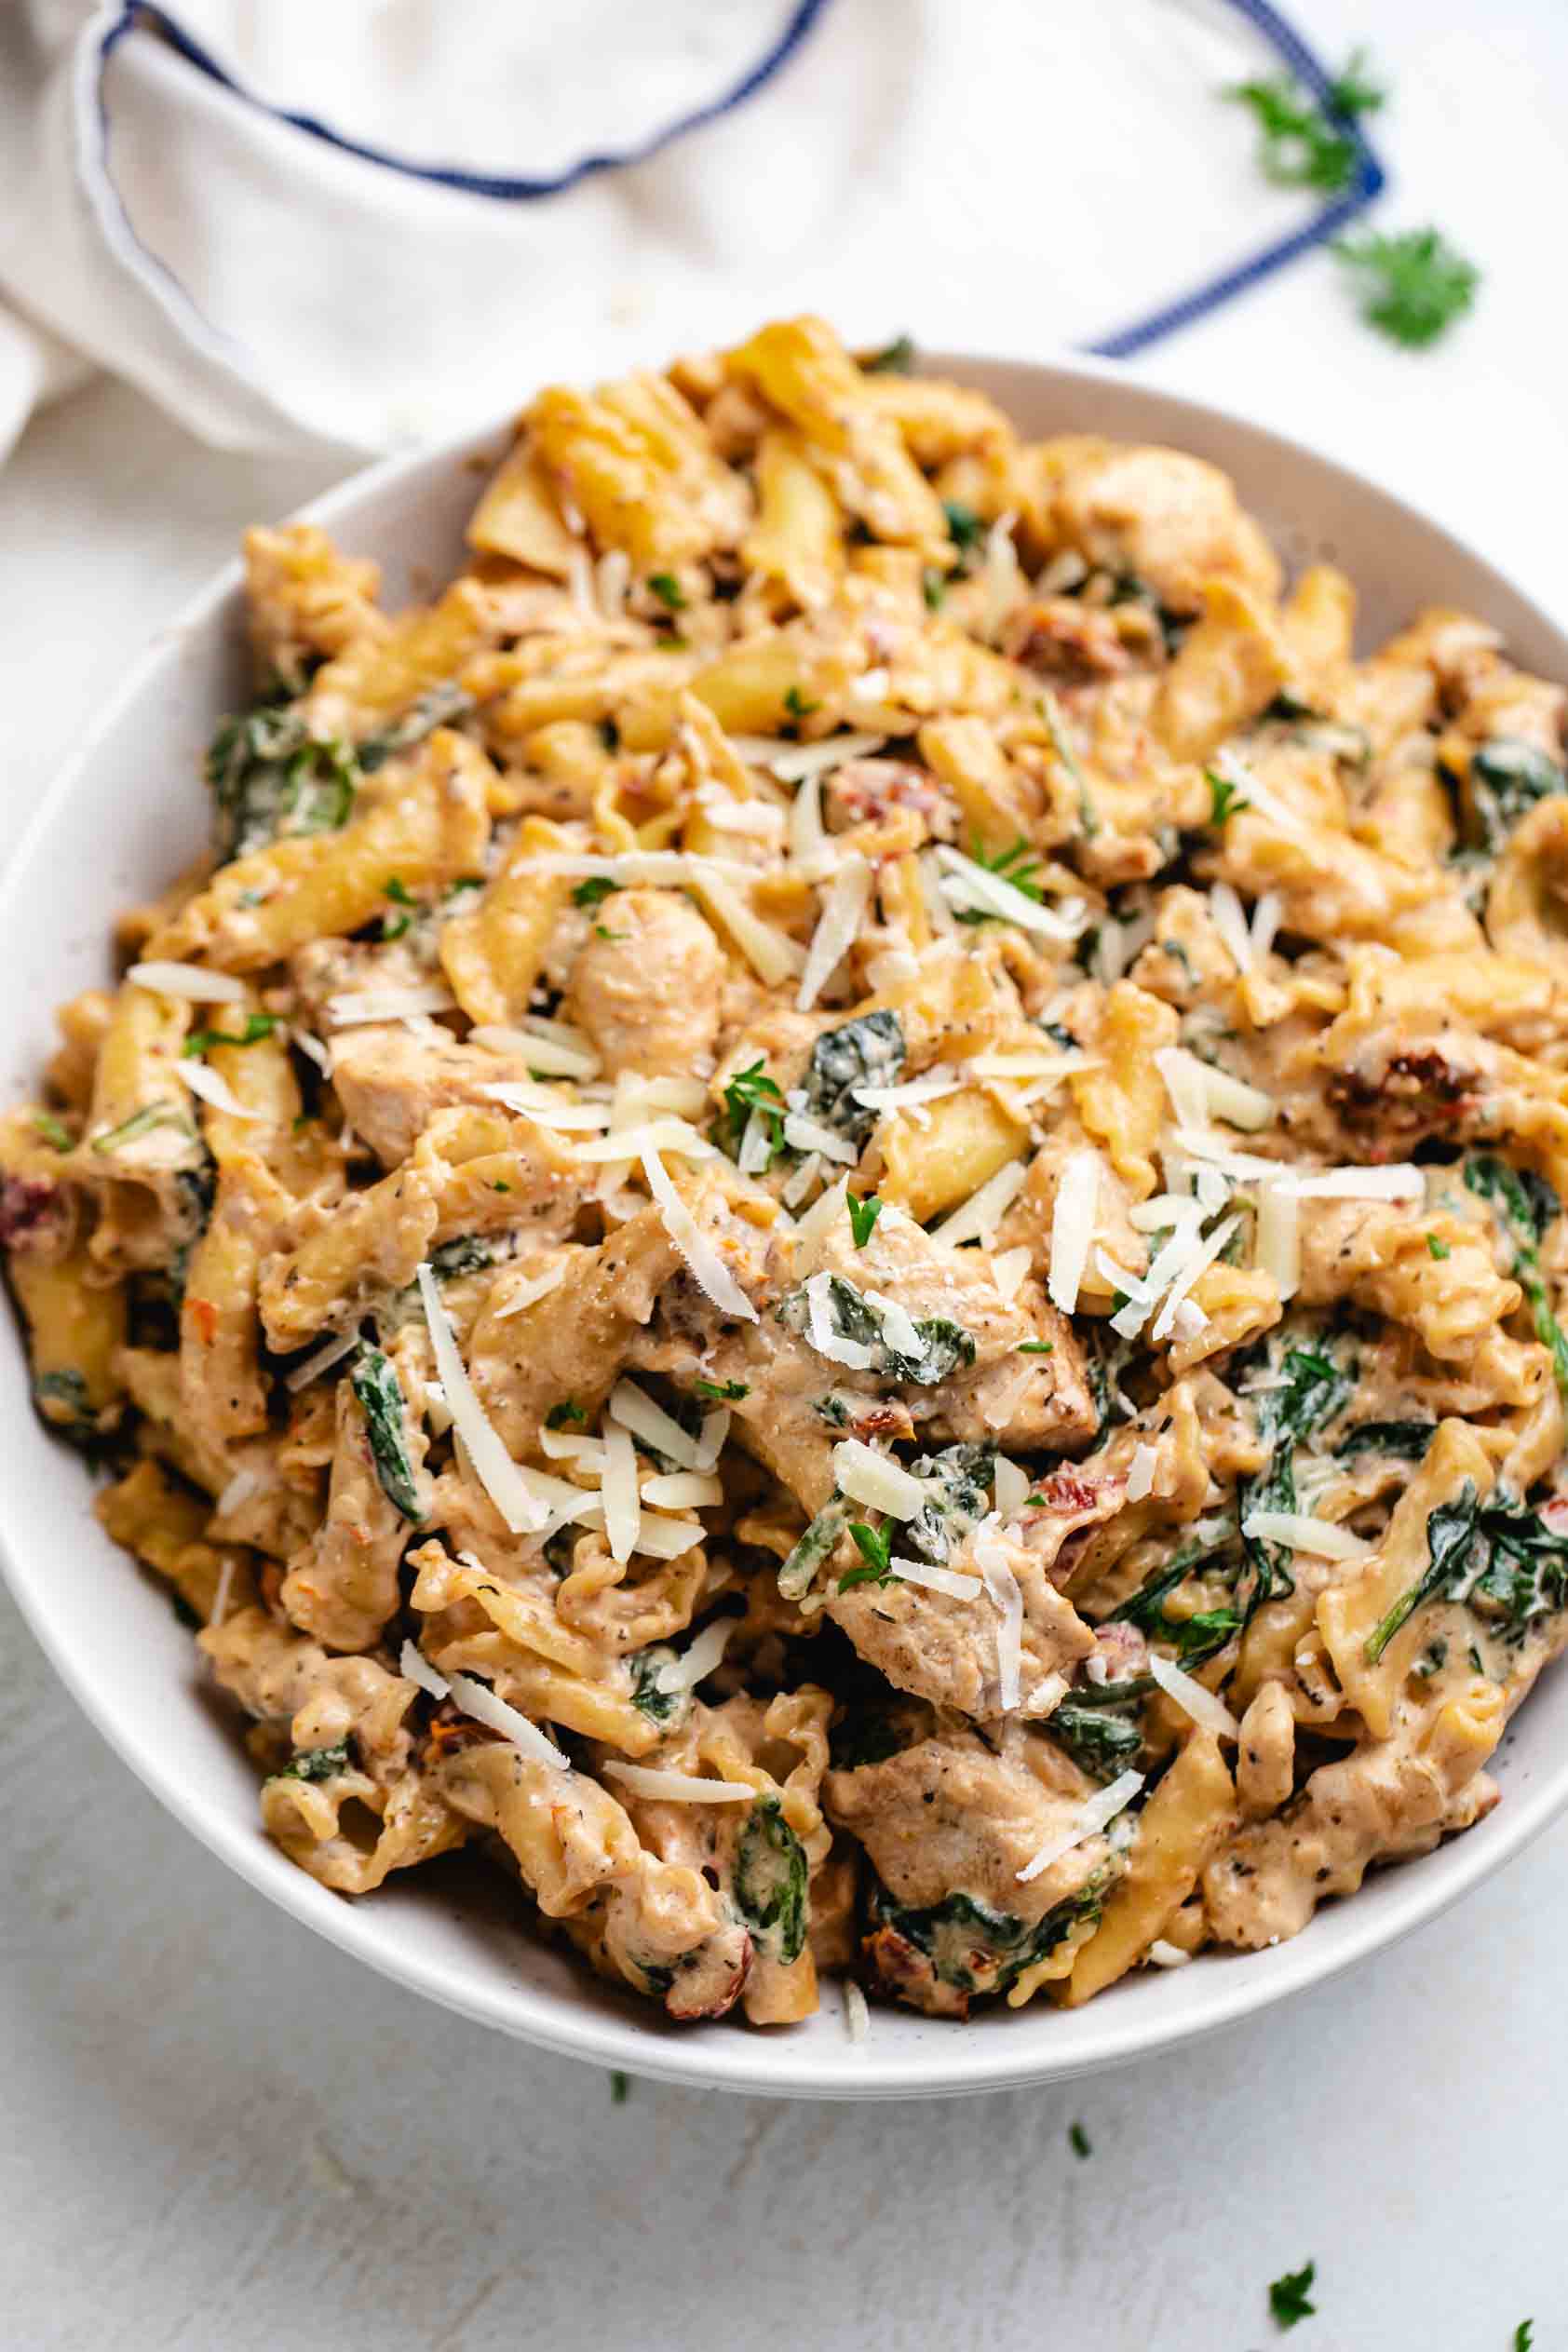 Chicken pasta with sundried tomatoes and spinach.